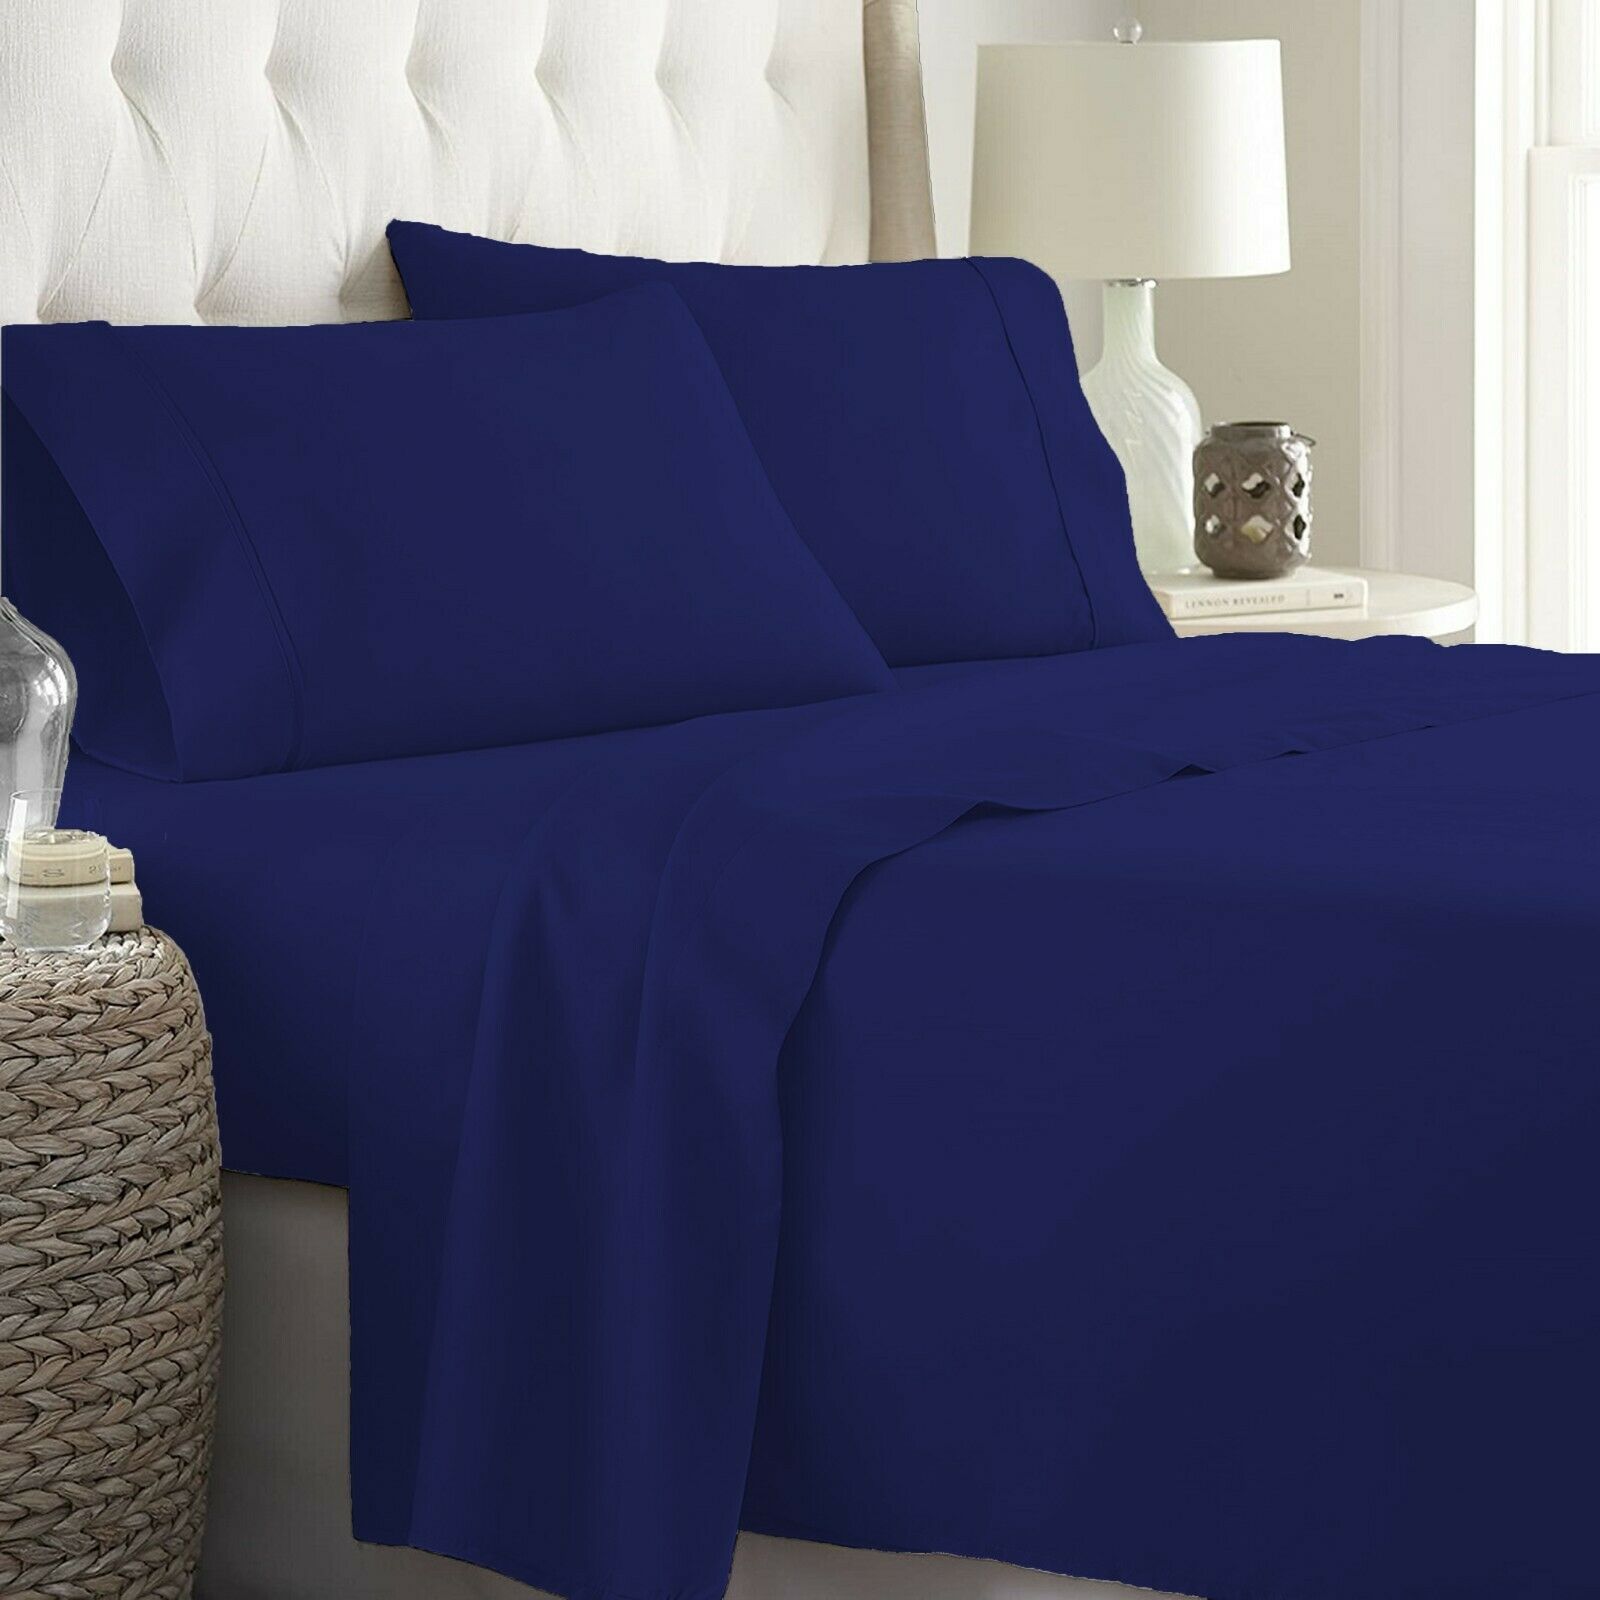 Buy King Size Flat Sheet Navy Blue Egyptian Cotton 1000 Thread Count at- Egyptianhomelinens.com